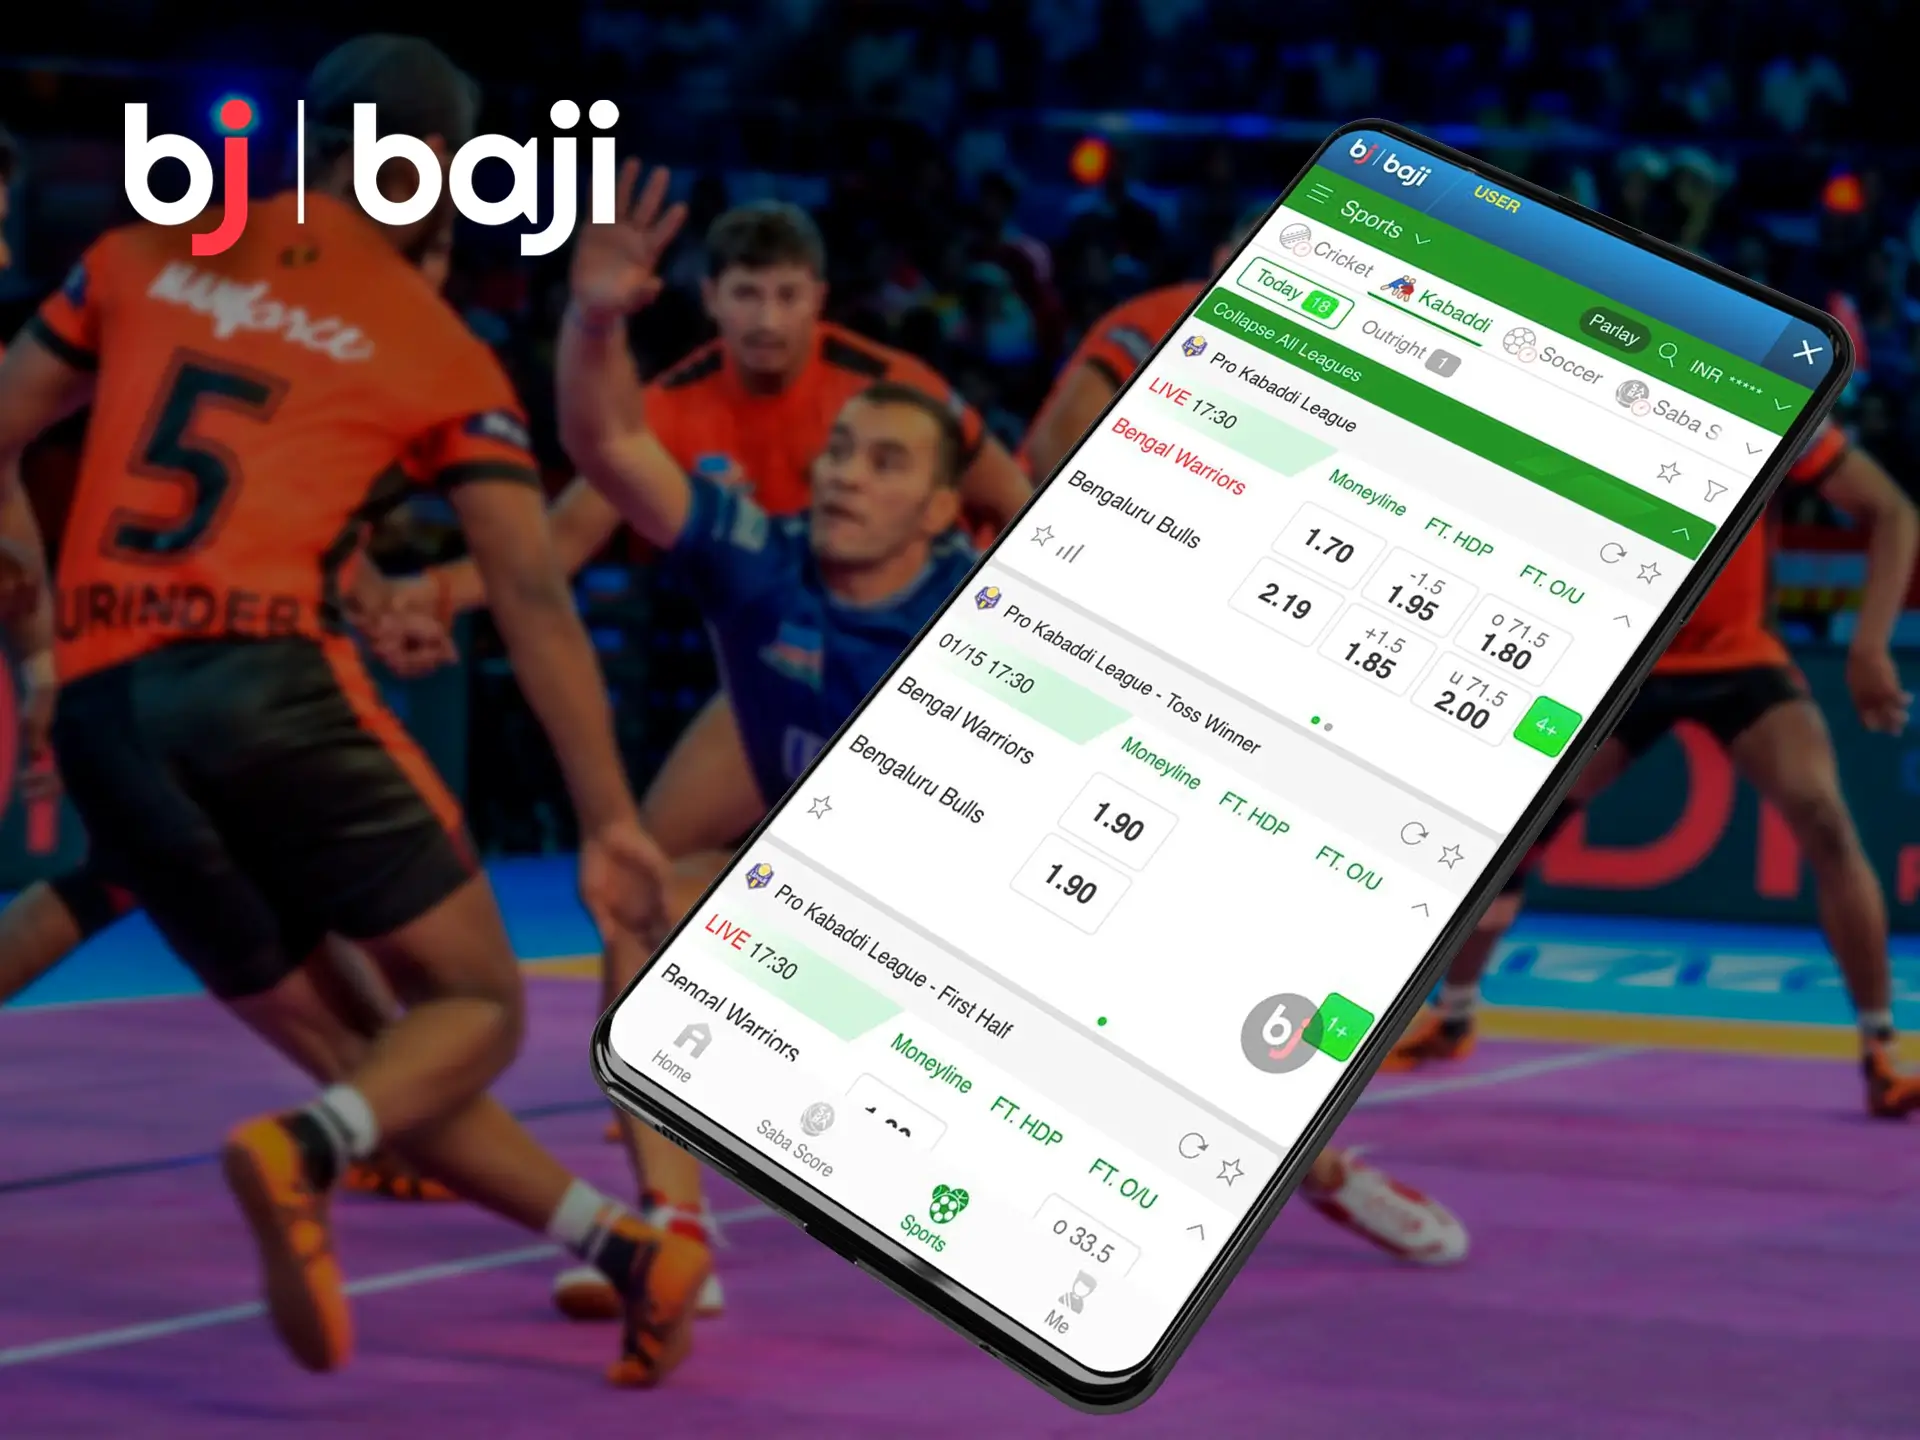 You can easily find any Kabaddi match on the Baji app.